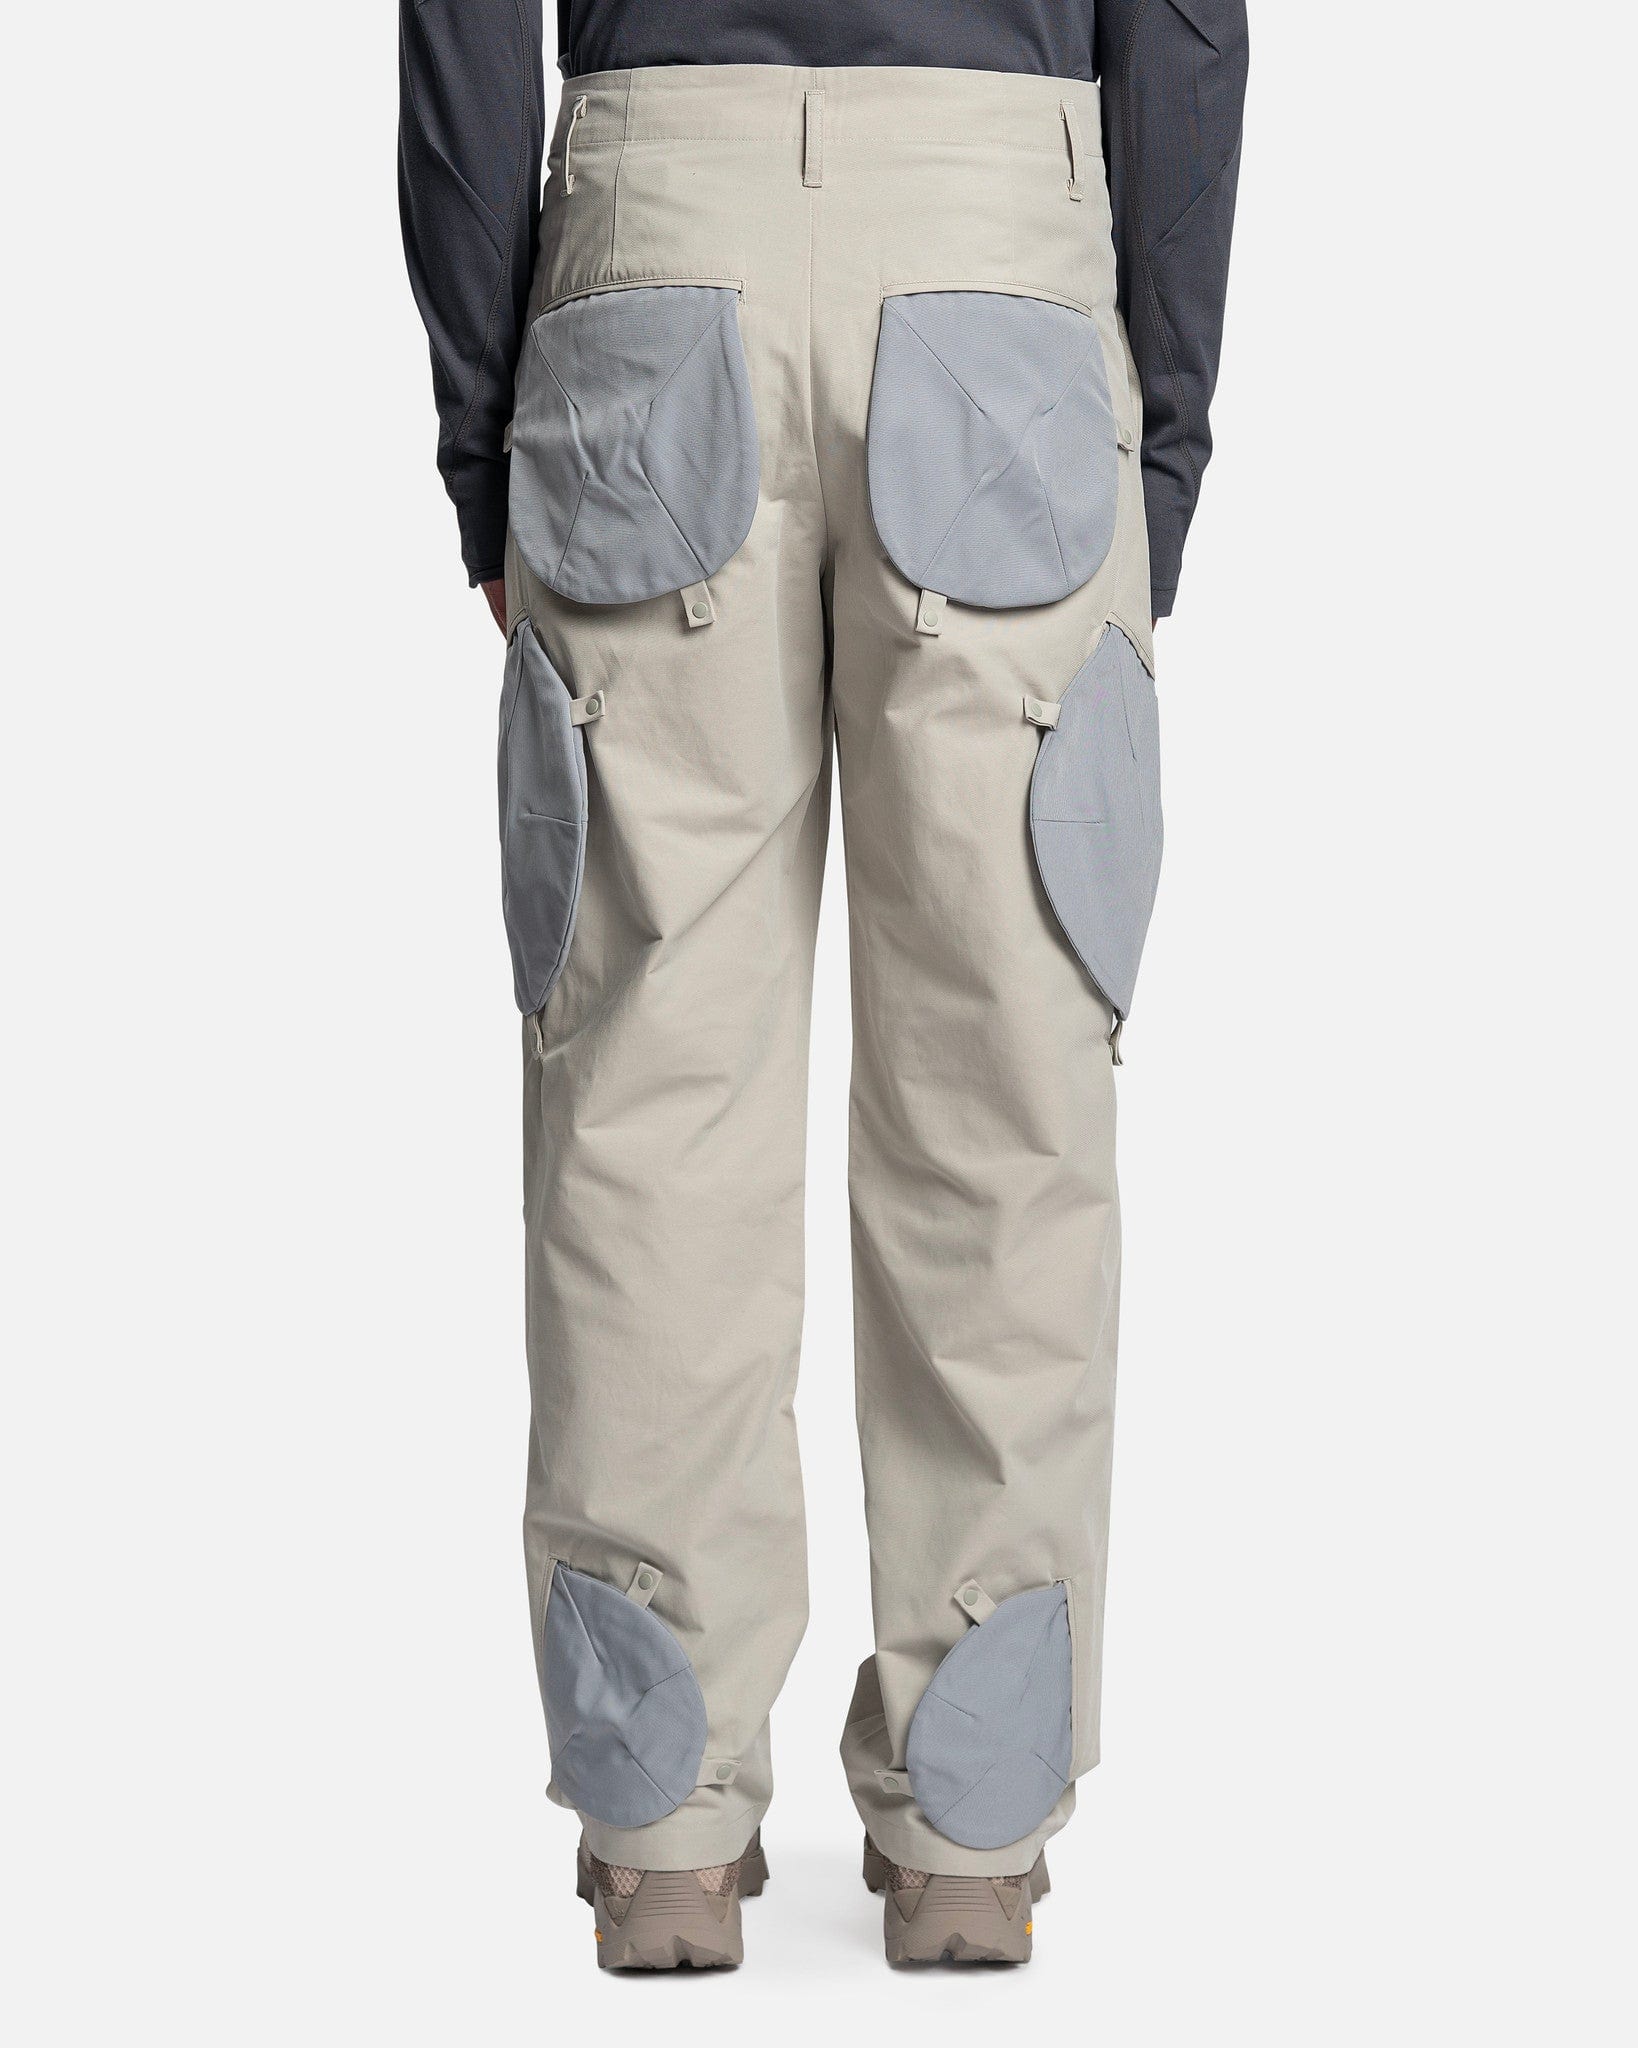 POST ARCHIVE FACTION (P.A.F) Men's Pants 5.0 Trousers Center in Grey